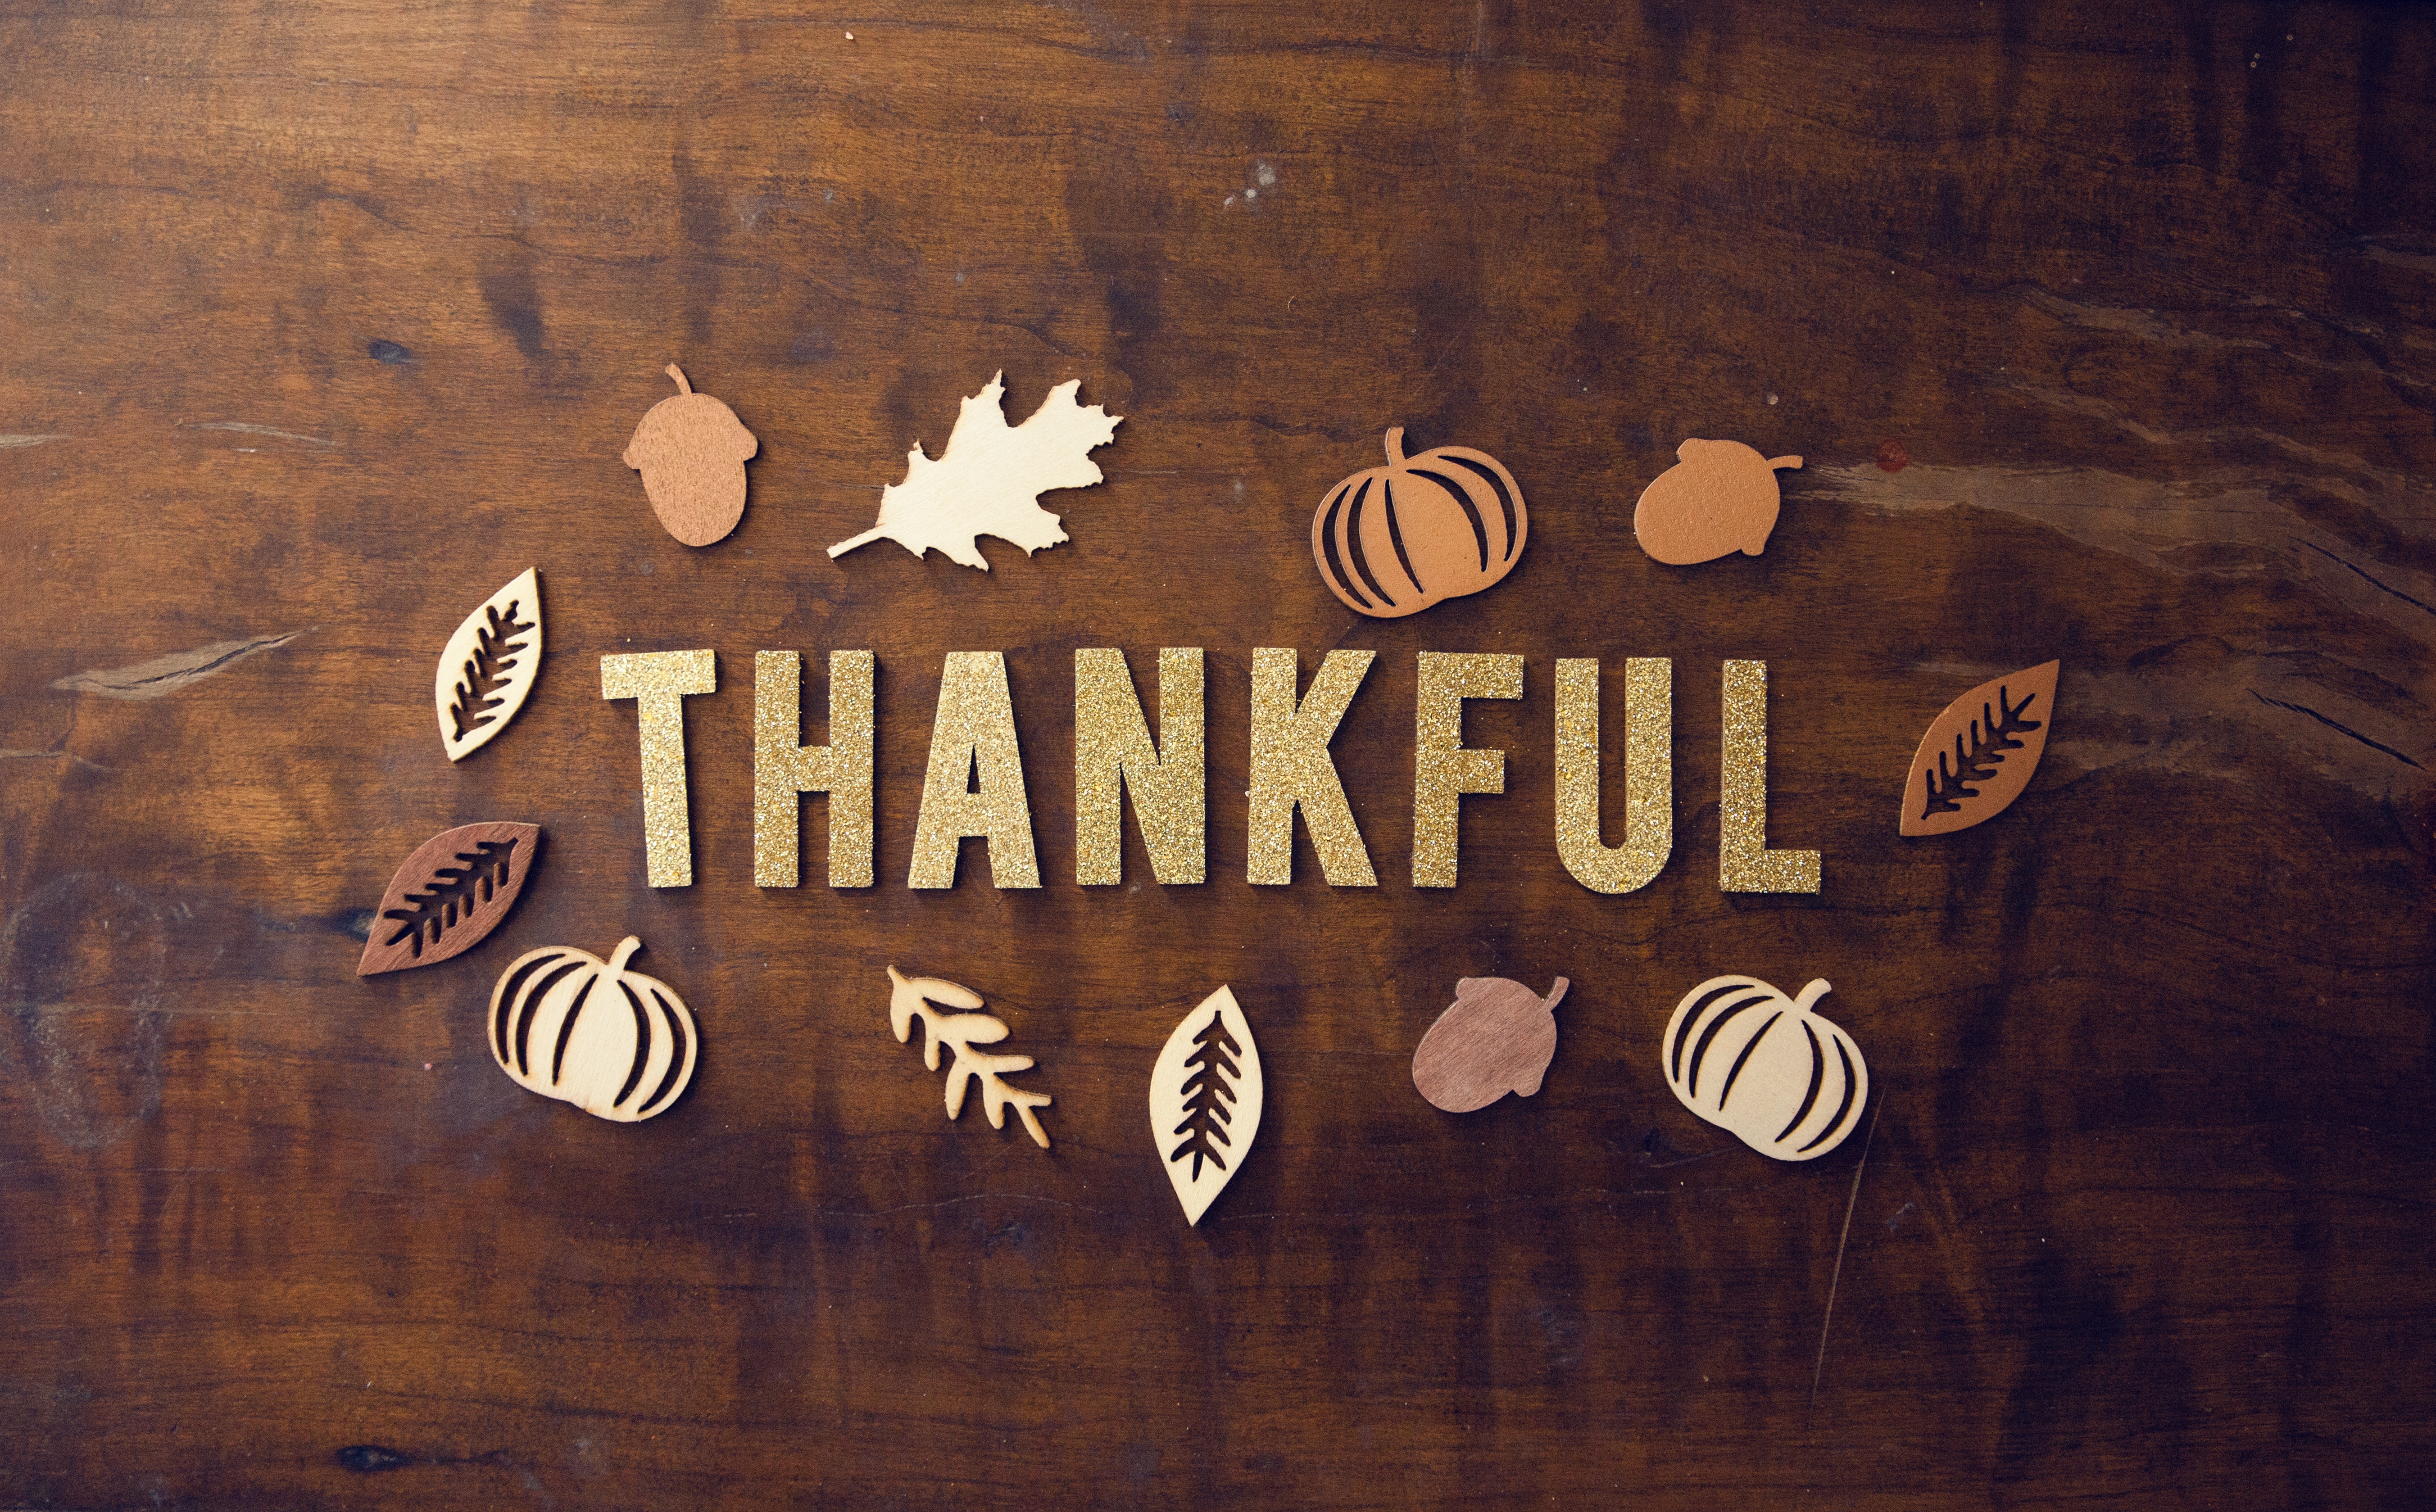 HD wallpaper, Thankful, Wooden Background, Thanksgiving Day, Glitter Letters, 5K